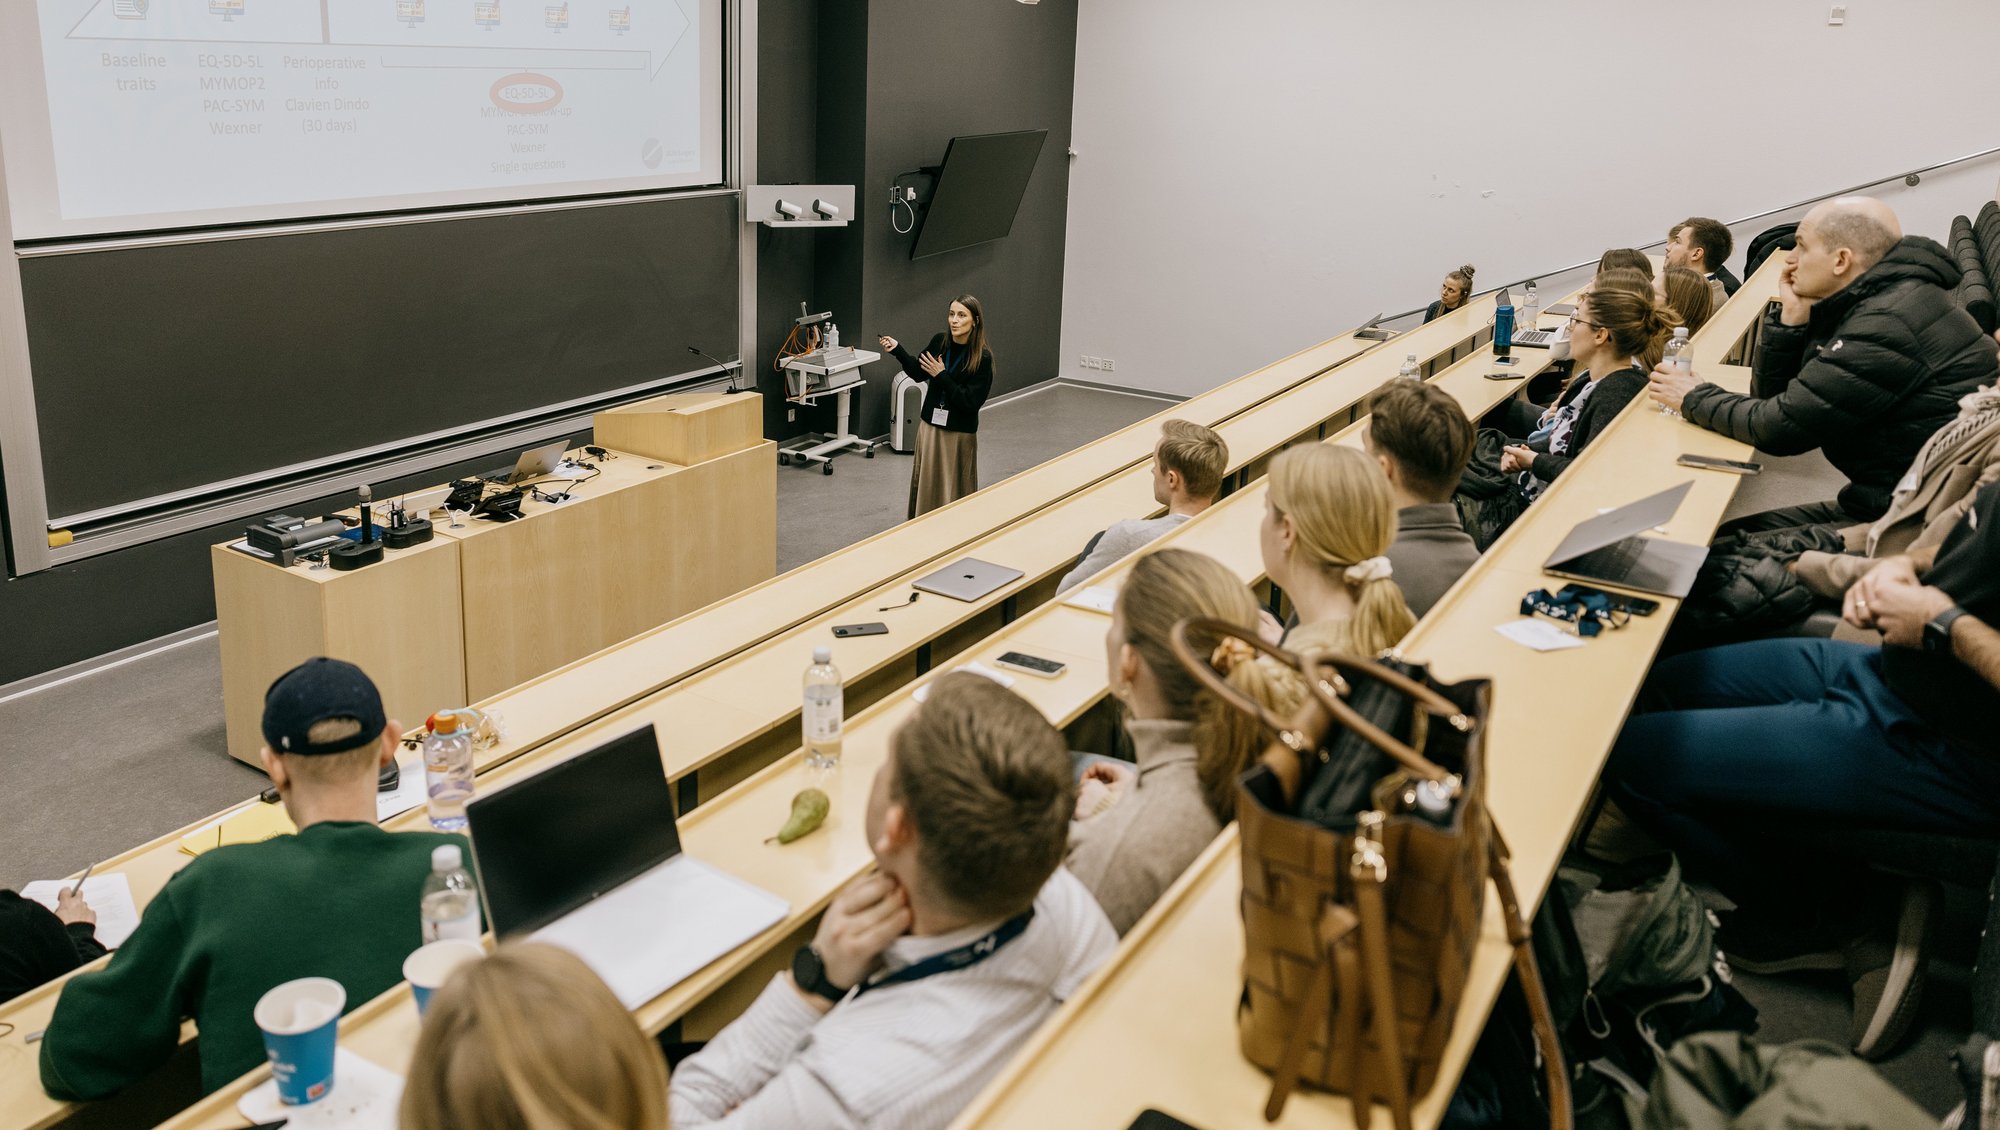 Throughout the day, a variety of pitches, flashtalks and oral sessions can be experienced around the faculty. Photo: Jens Hartmann Schmidt, AU Photo.